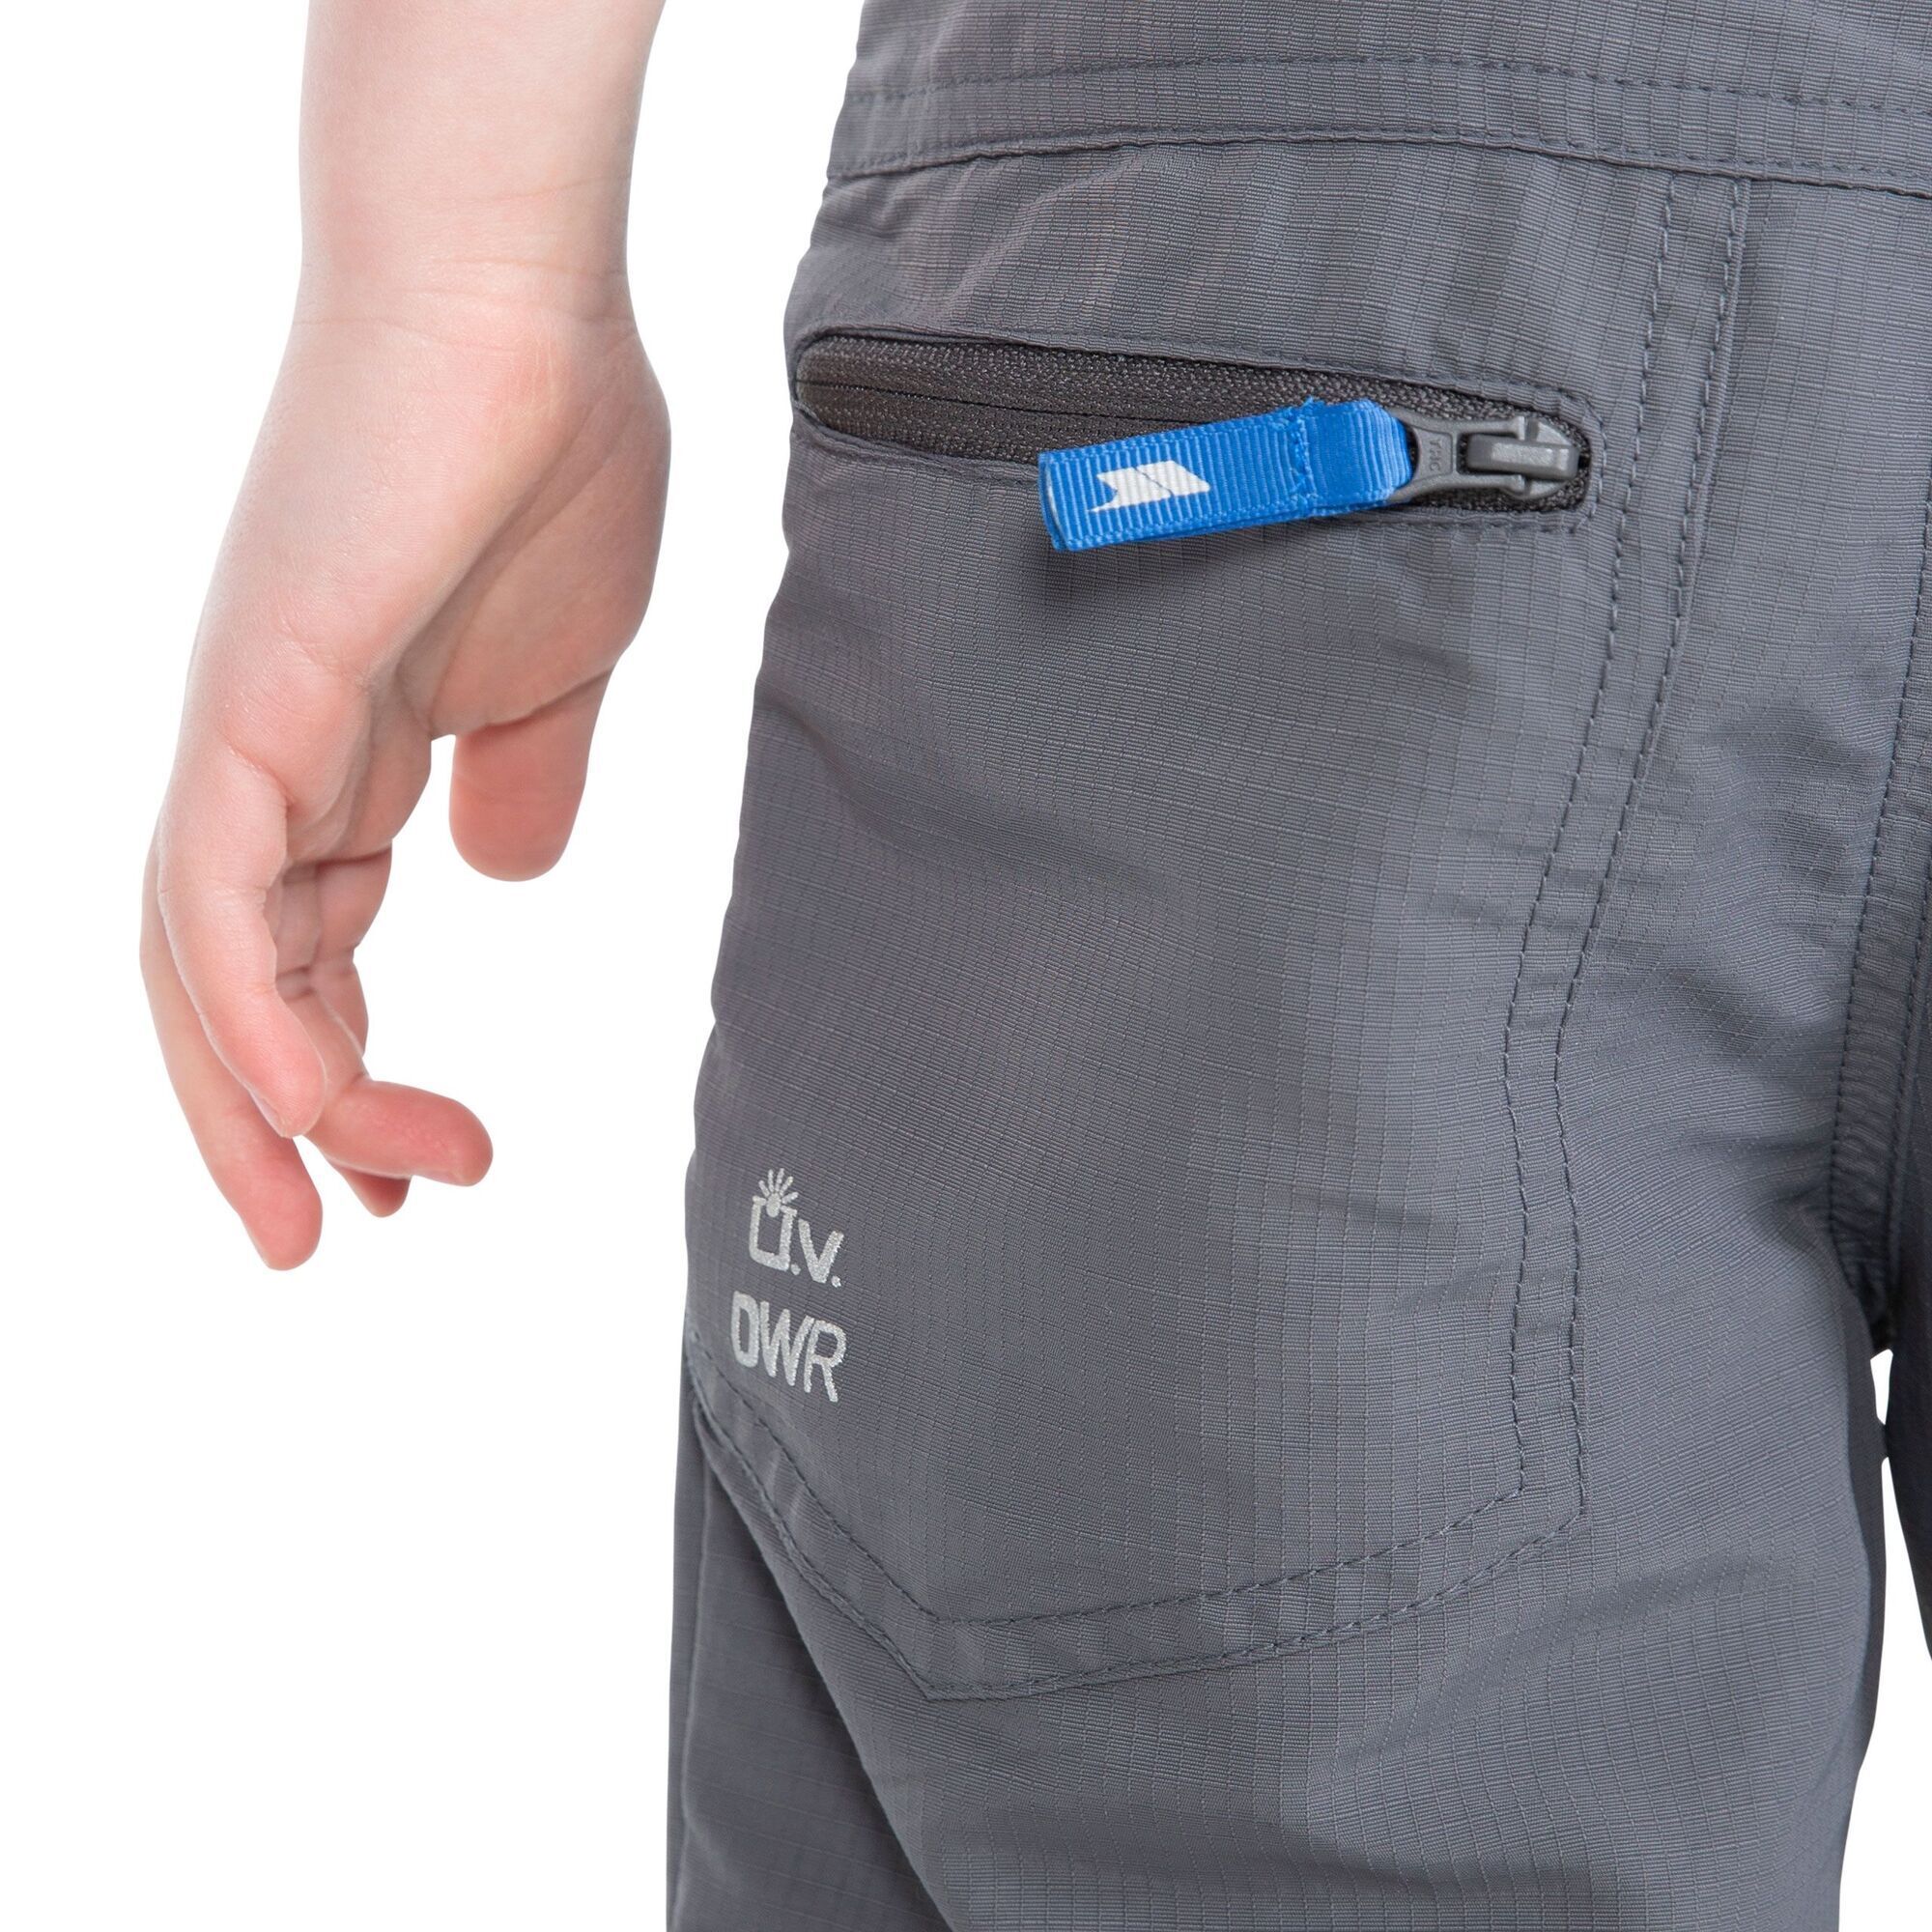 Material: Polyamide Ripstop. Durable casual shorts with UV40+ protection. With inner elasticated waistband and front fly opening. Features 2 front zip pockets. Back has 1 zipped and 1 patch pocket. Sizes: 2-3 years - waist 50.5cm, inside leg 40.5cm, 3-4 years - waist 53cm, inside leg 45.5cm, 5-6 years - waist 56cm, inside leg 50.5cm, 7-8 years - waist 58.5cm, inside leg 57cm, 9-10 years - waist 61cm, inside leg 66cm, 11-12 years - waist 66cm, inside leg 71cm, 13-14 years - waist 71cm, inside leg 73.5cm, 15-16 - waist 73.5cm, inside leg 76cm.